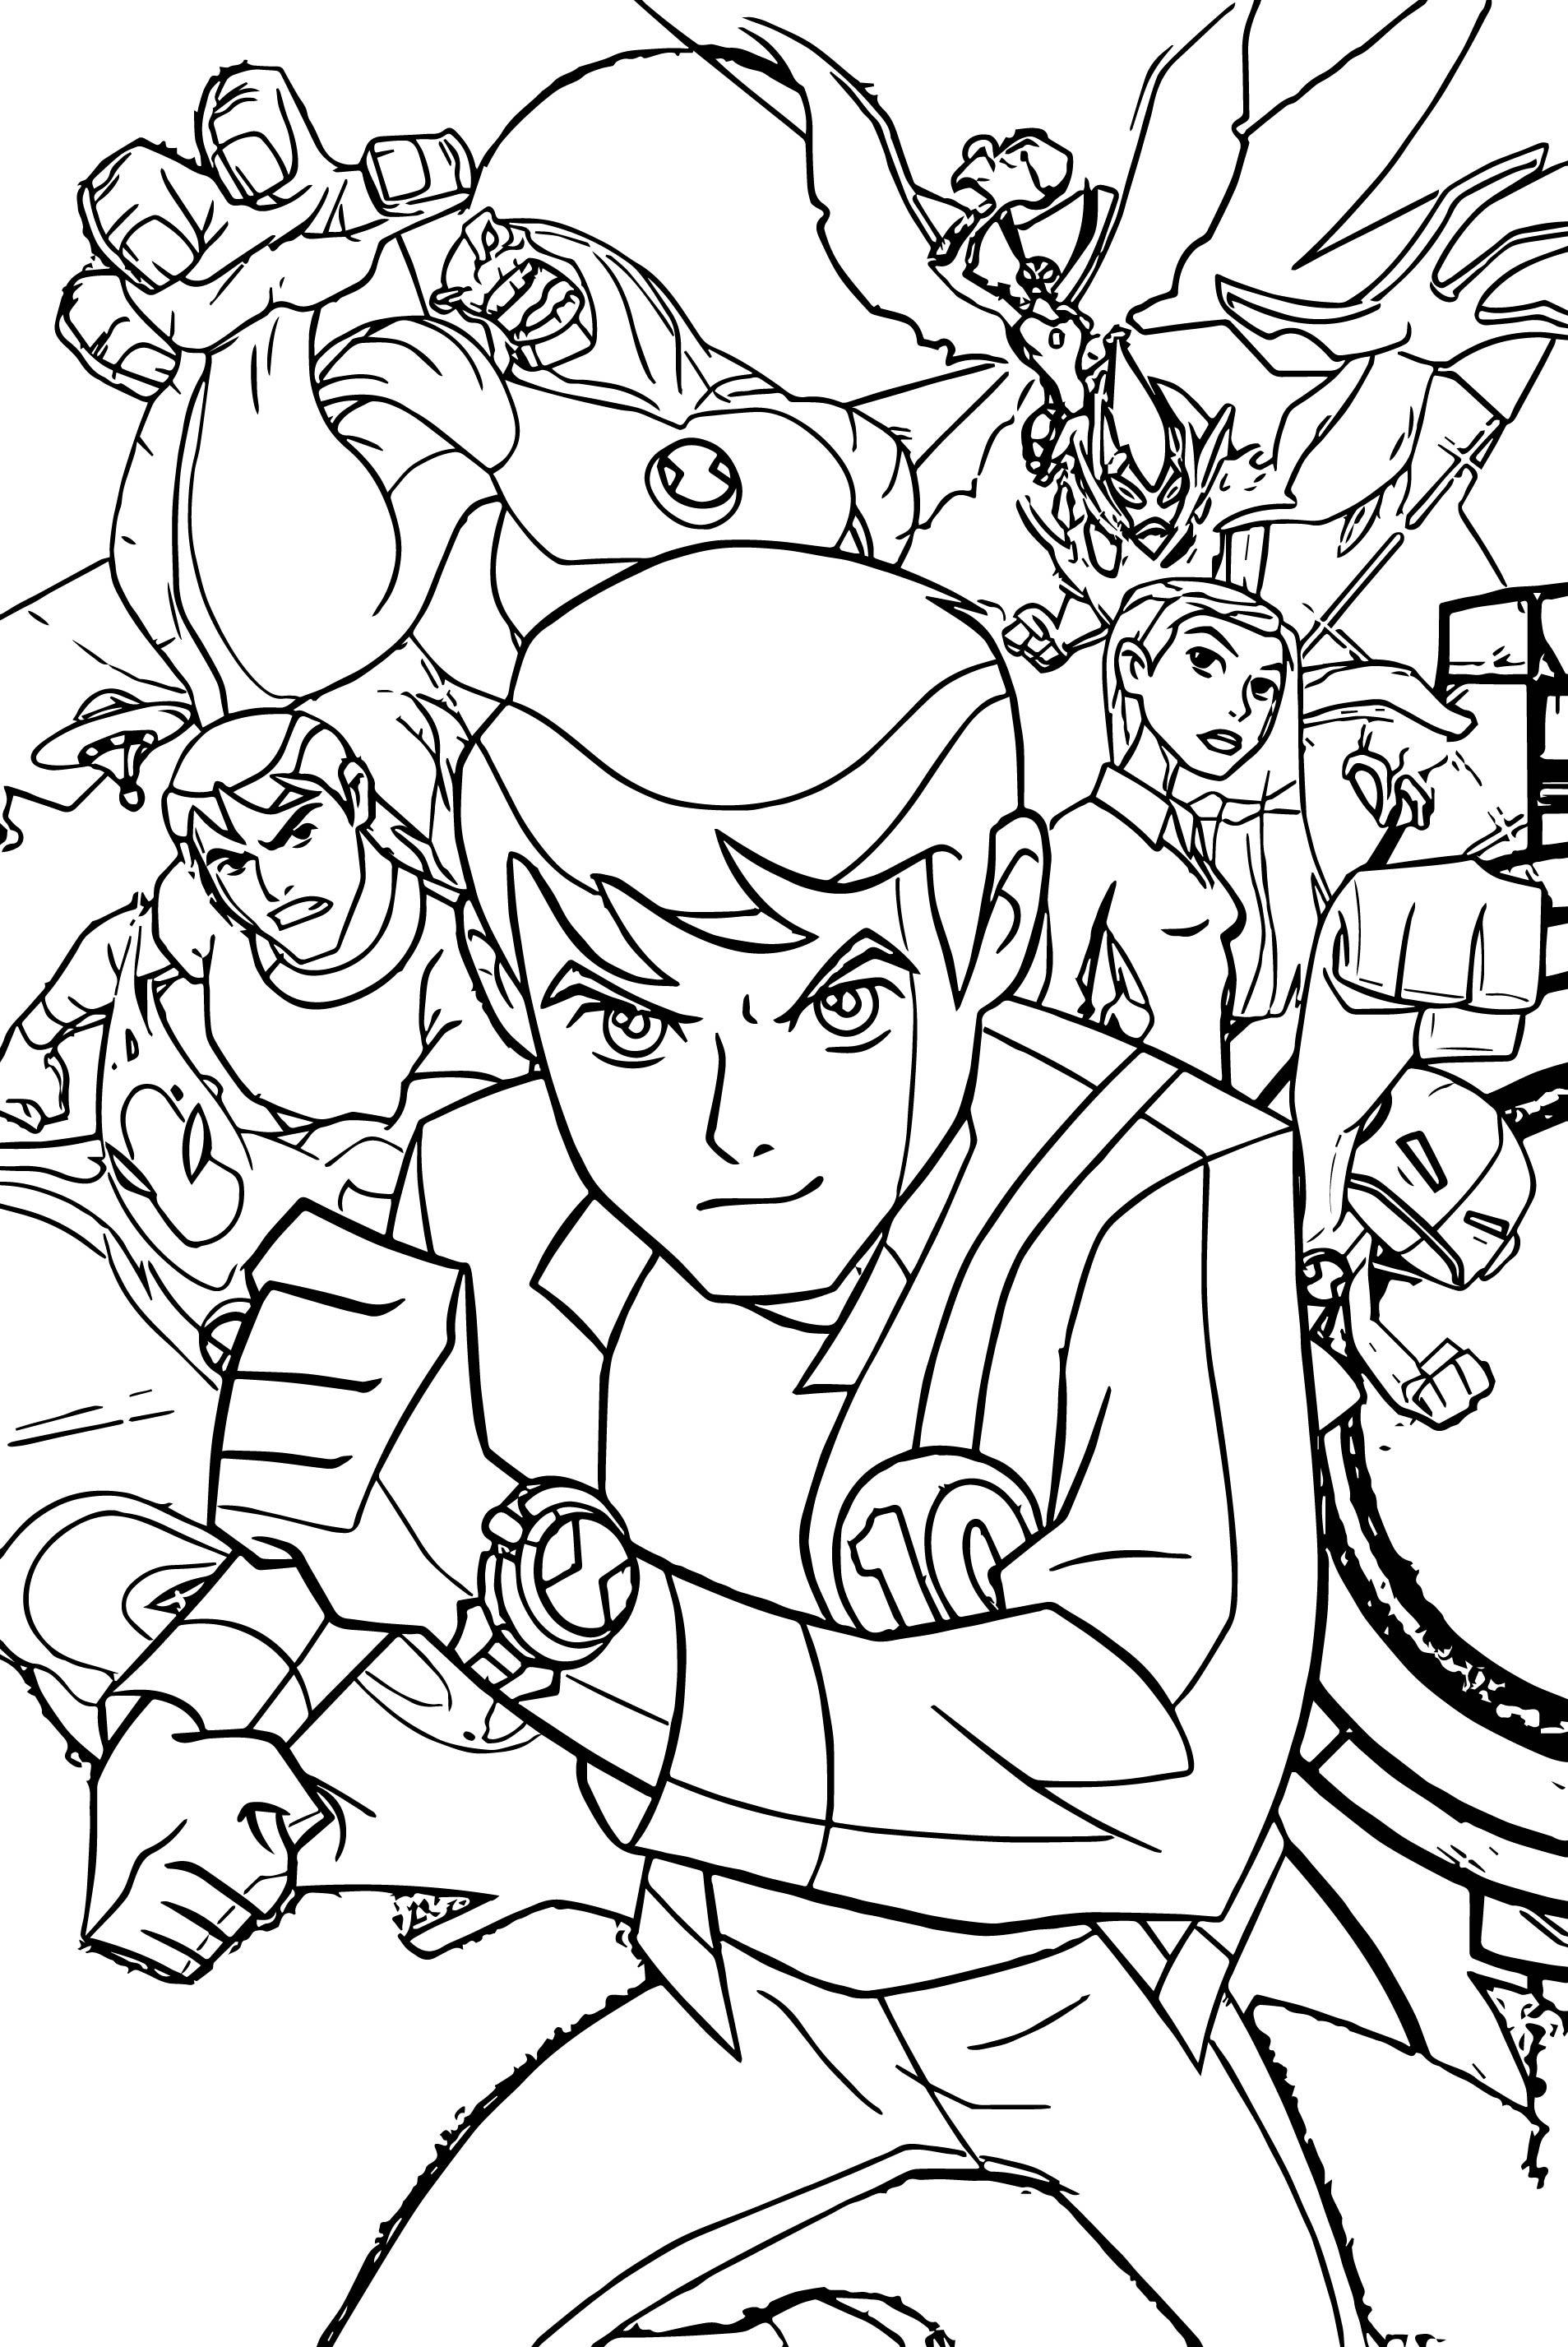 Download Free Printable Ben 10 Coloring Pages For Kids - jeffersonclan